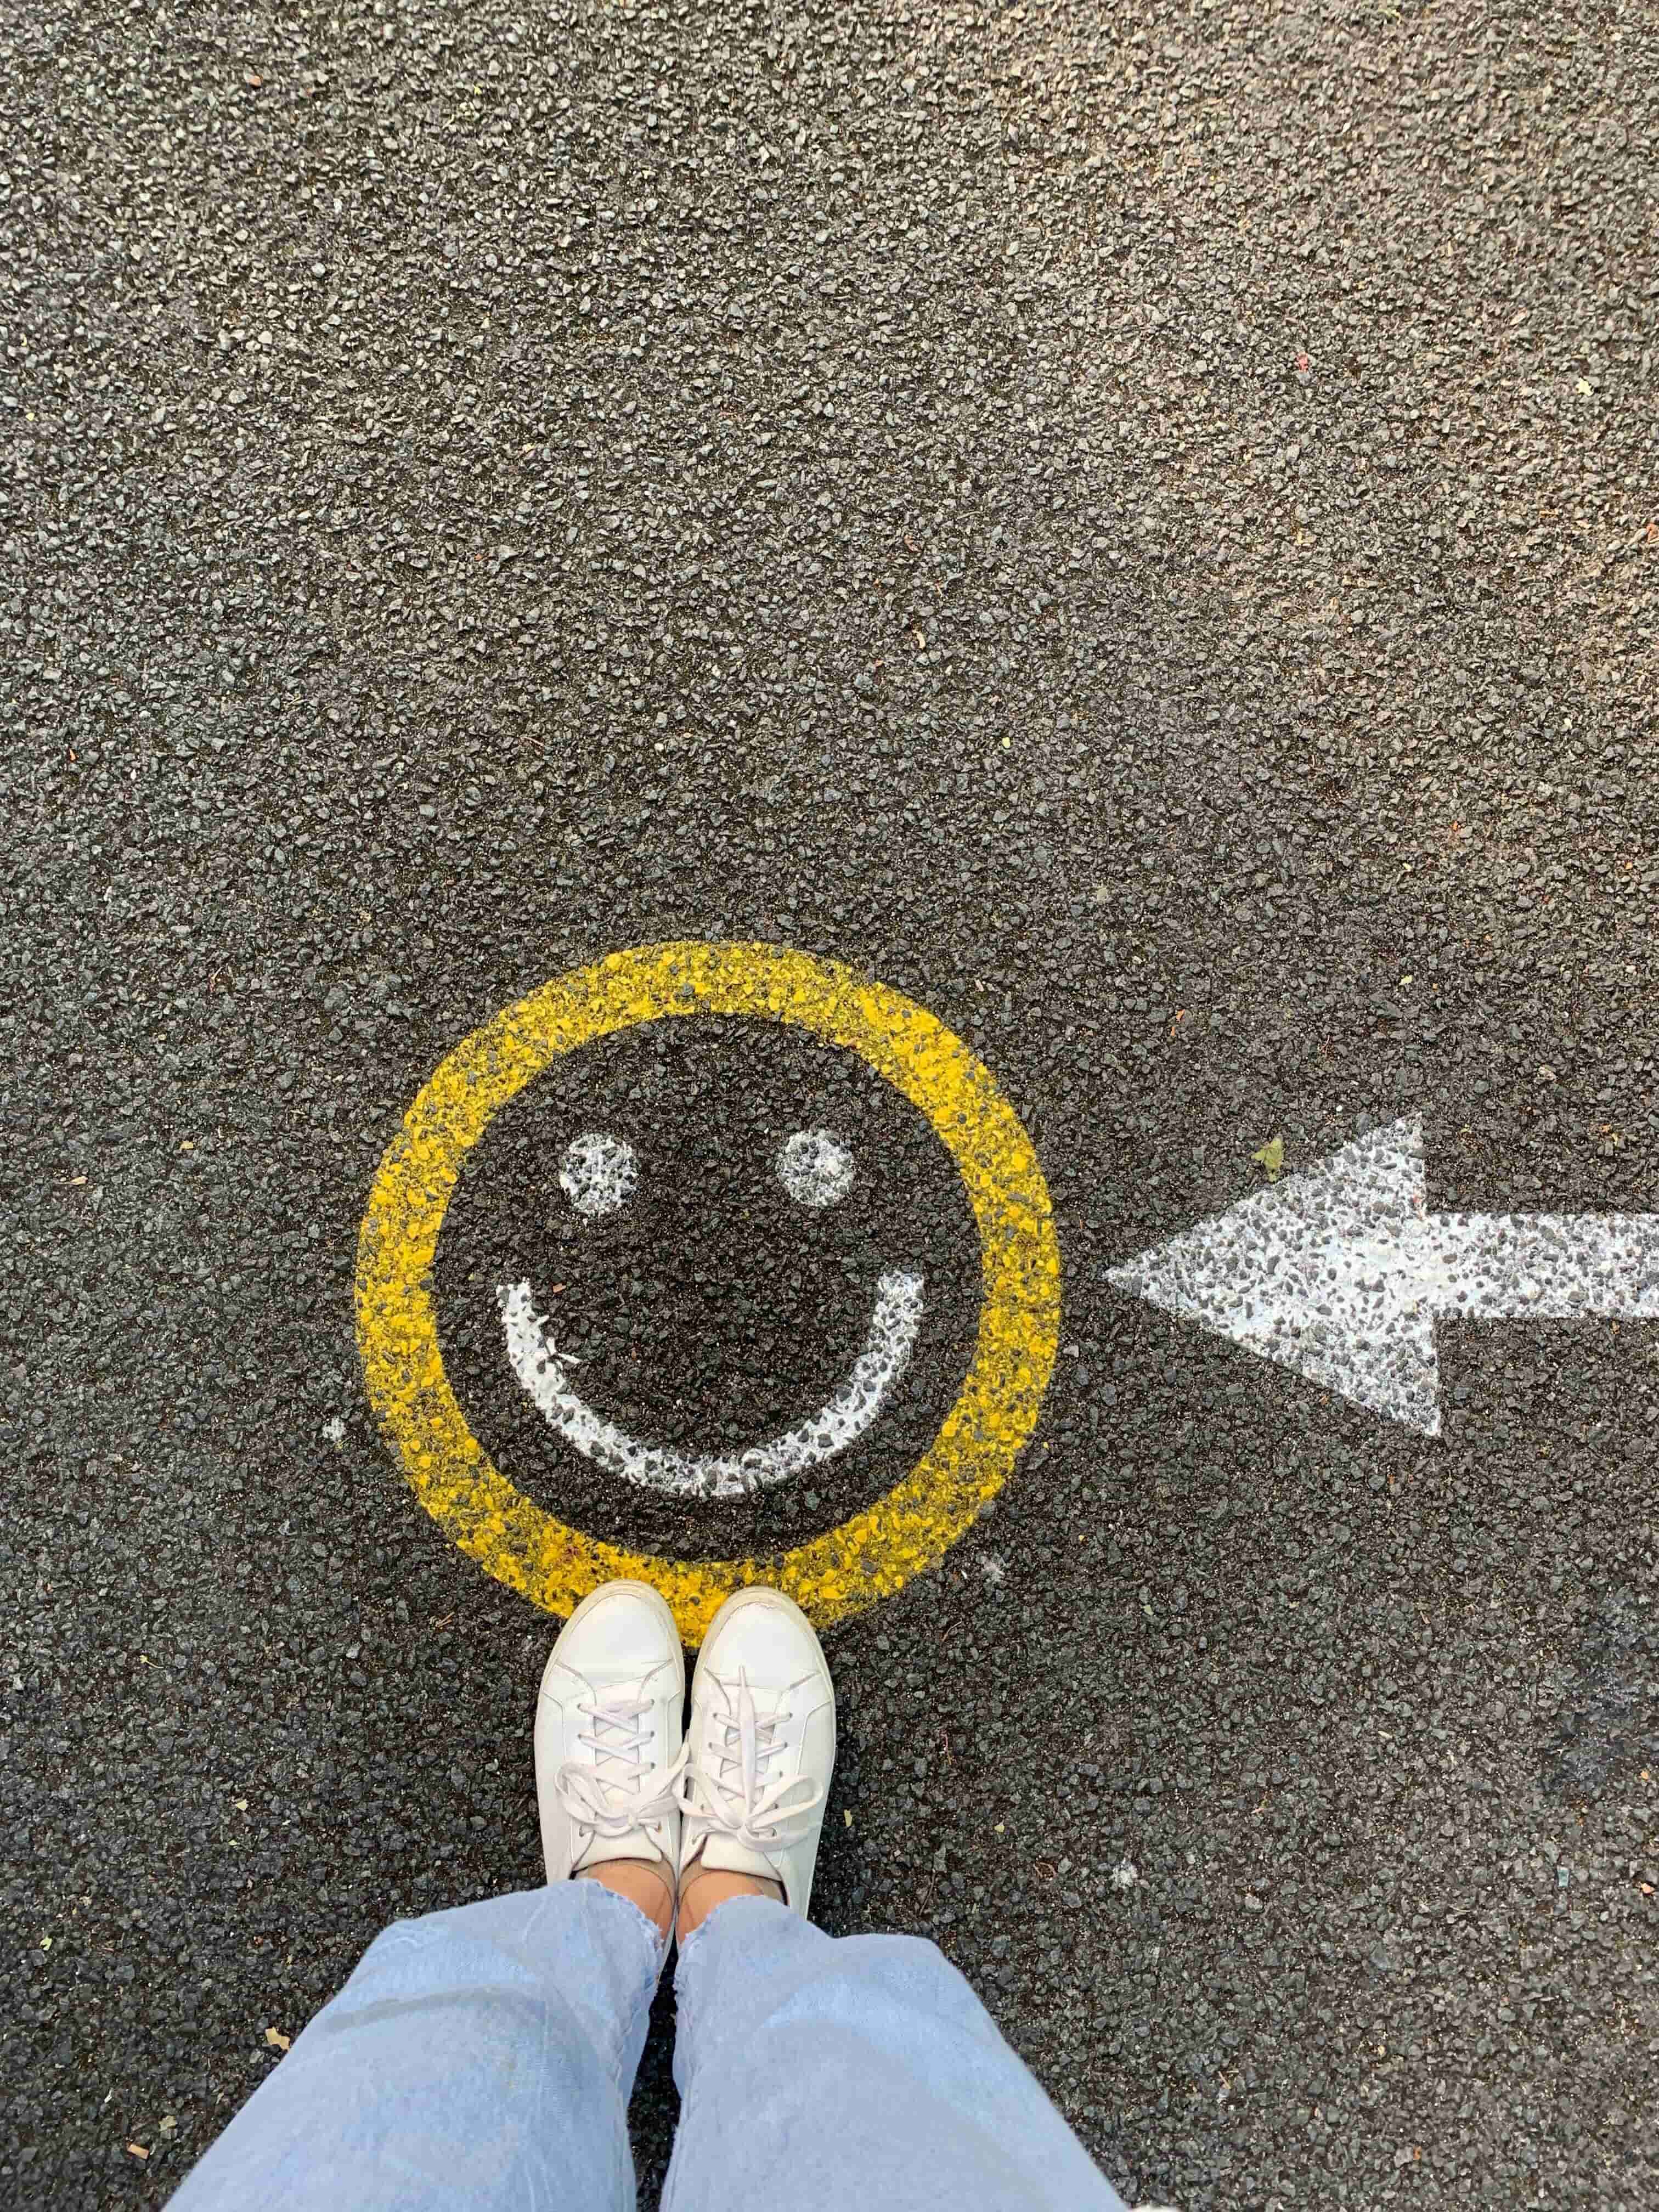 Someone standing in front of a smiley face on the pavement